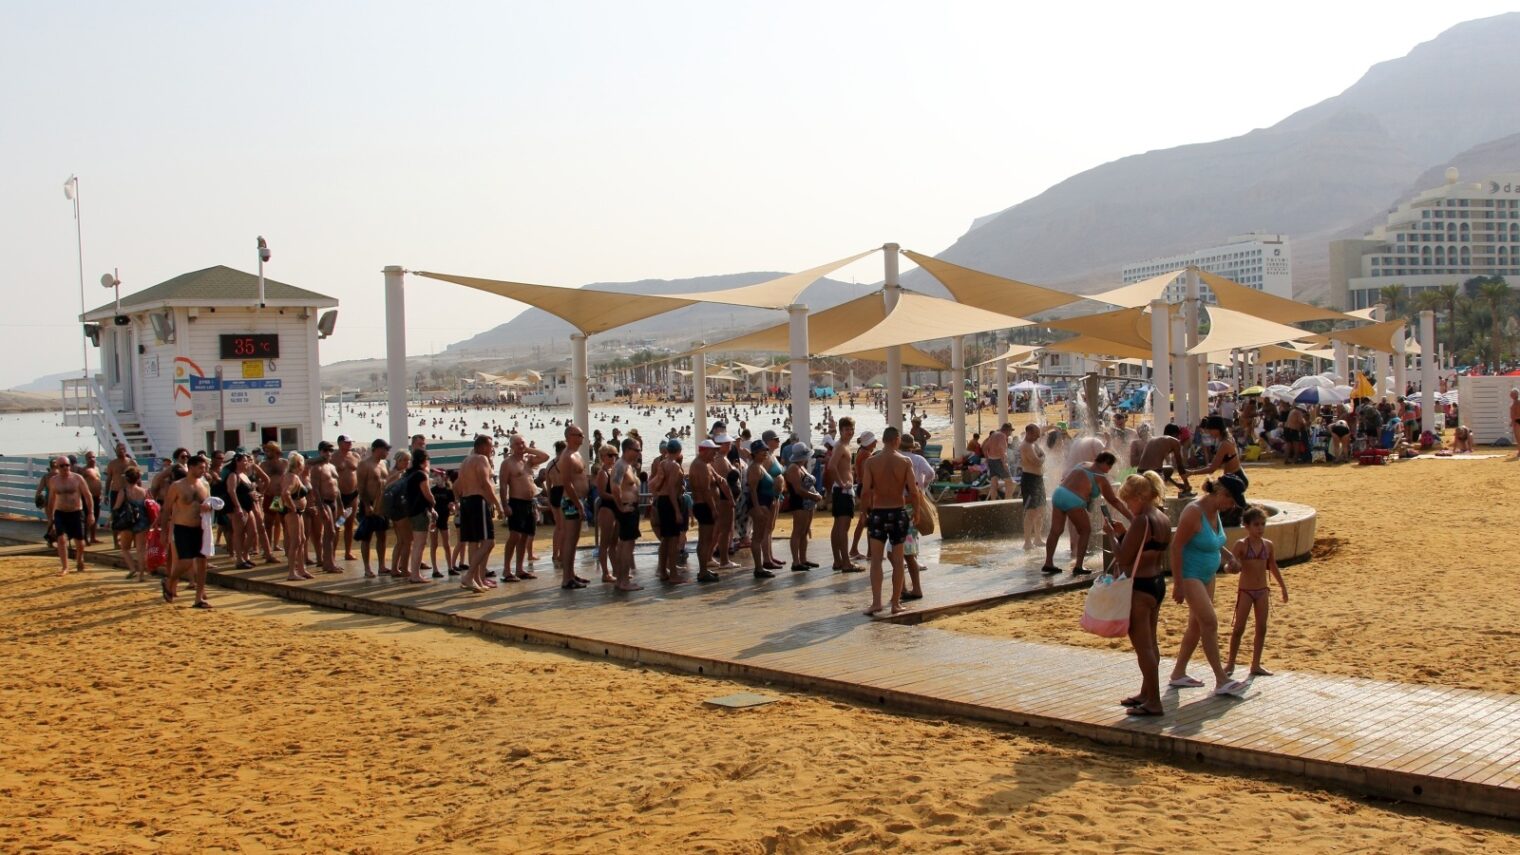 Bathers queuing up for the showers at an Ein Bokek (Dead Sea) beach. Photo by B-1972 via Shutterstock.com